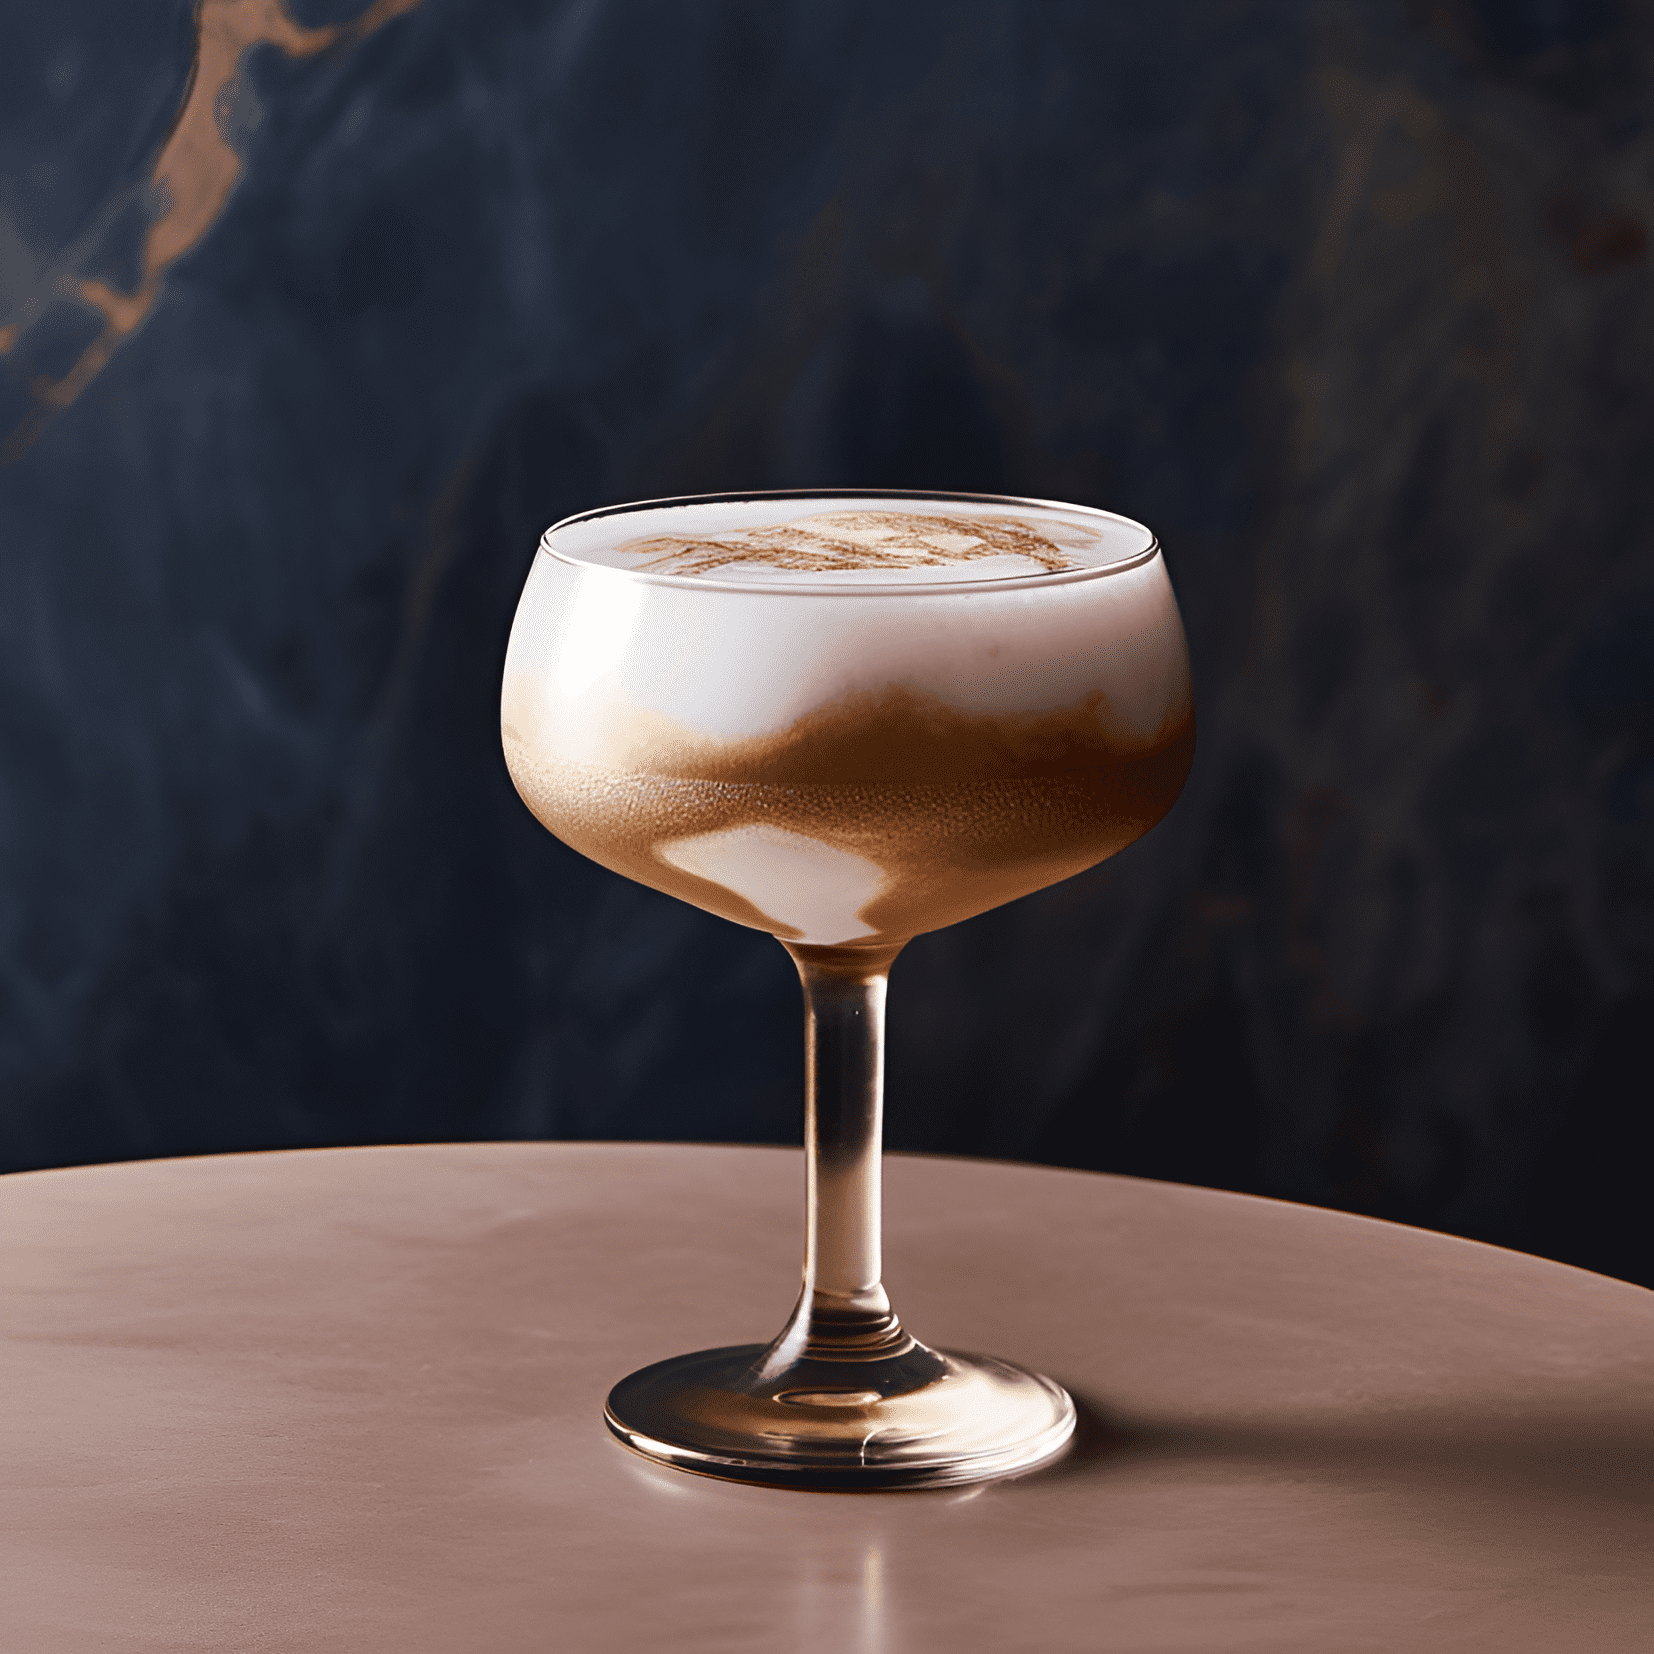 Keeley Cocktail Recipe - The Keeley cocktail has a complex and layered taste, with a perfect balance of sweet, sour, and bitter notes. It has a smooth and velvety texture, with a hint of fruitiness and a subtle warmth from the alcohol.